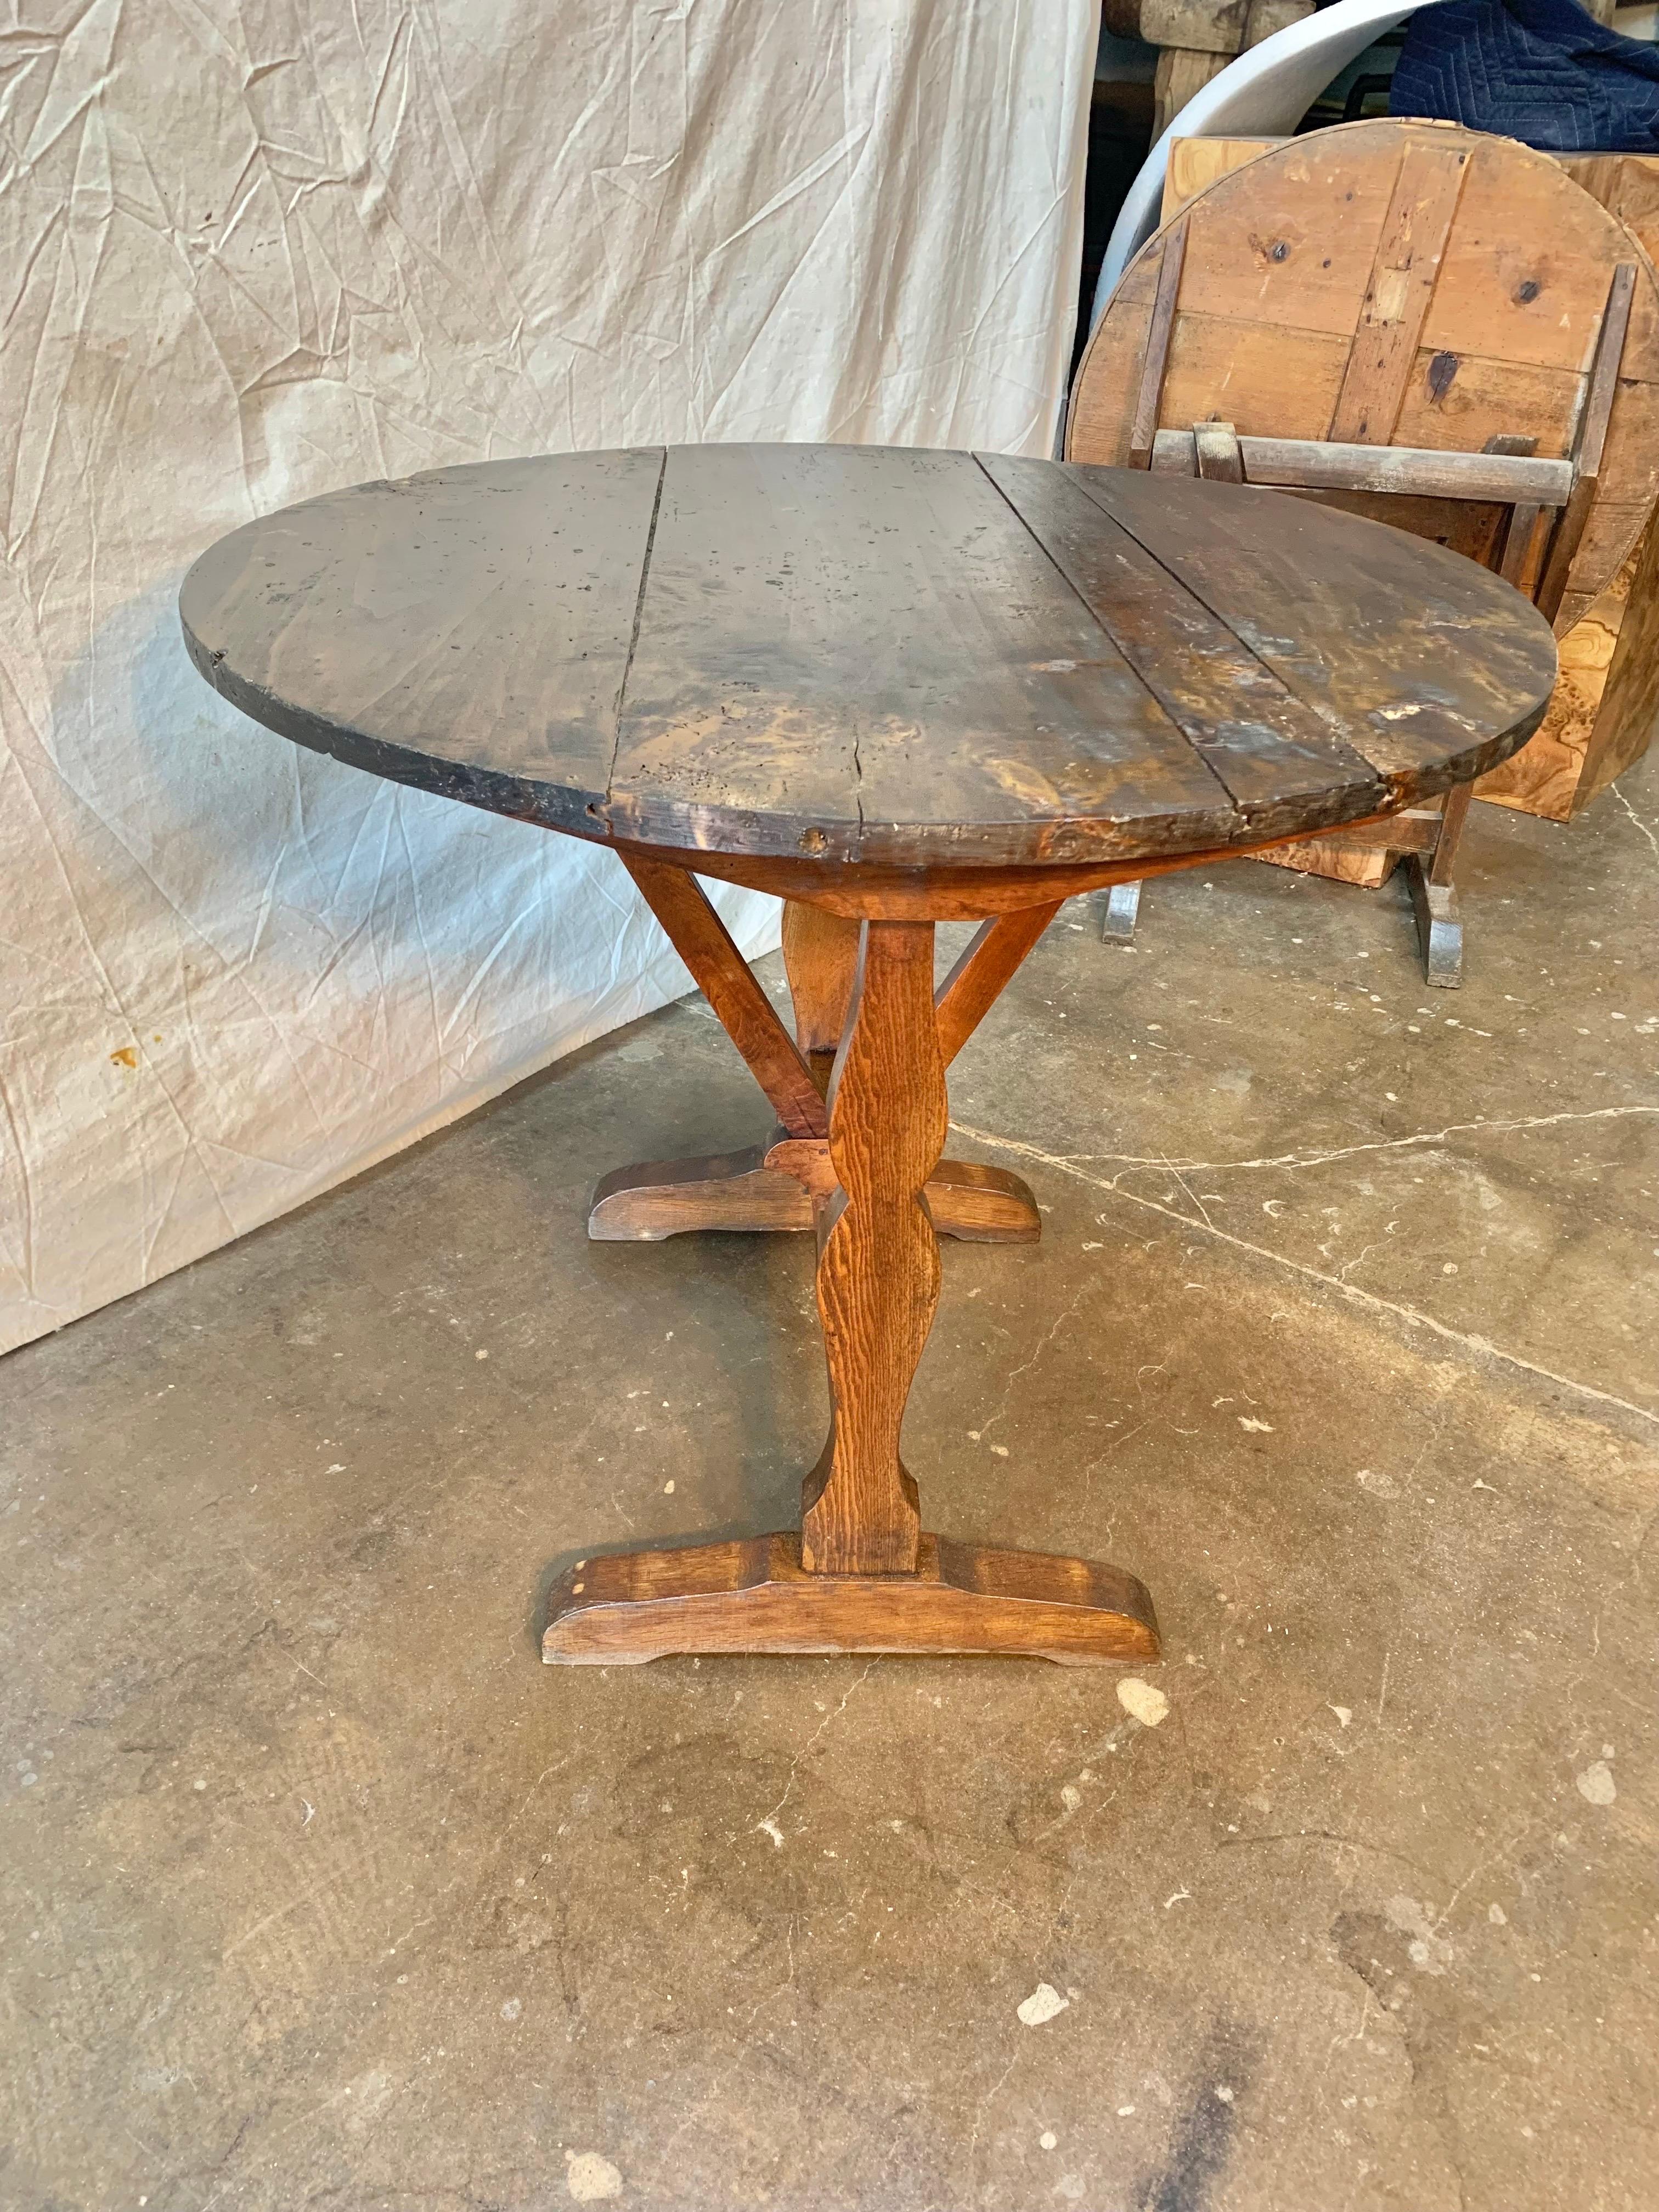 French wine tasting table, also known as a vendage or vigeron table, which was once used in the vineyards of France for tasting wine or enjoying a meal. This table would be suitable for use as a side table or in a wine cellar. Featuring a tilt-top,